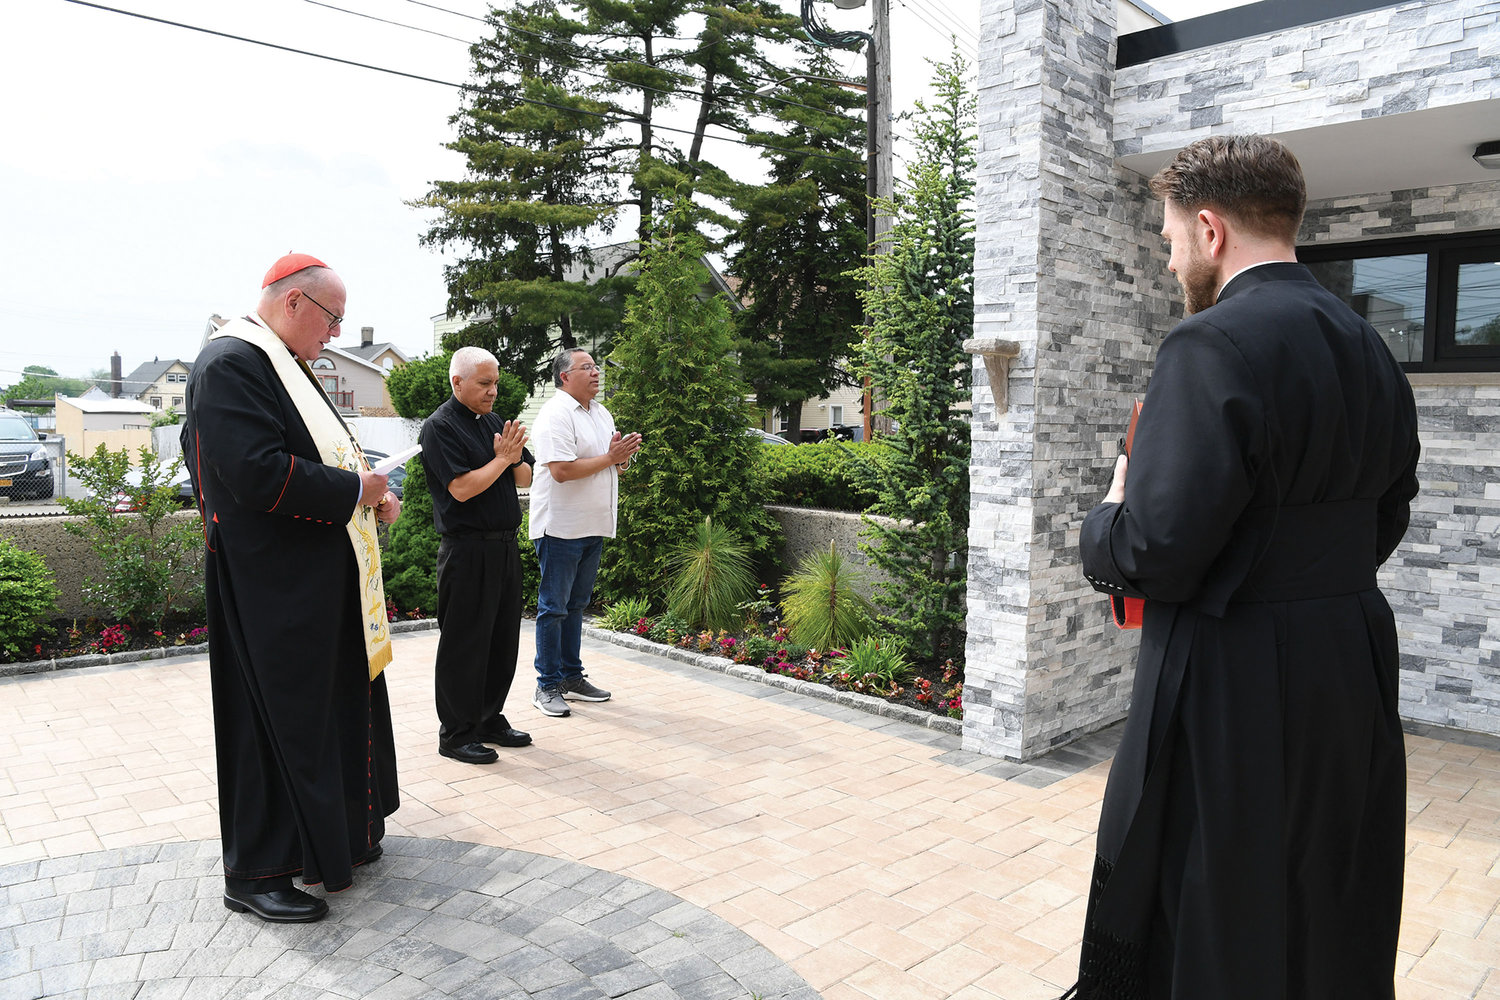 Cardinal Dolan leads a prayer of invocation and reparation on the plaza of Our Lady of Mount Carmel-St. Benedicta-St. Mary of the Assumption parish on Castleton Avenue on Staten Island May 22. The empty ledge in the brick facade is where the statue of Our Lady of Mount Carmel was before it was destroyed by a vandal. Next to Cardinal Dolan is Father Hernan Paredes, S.J., pastor; Abelardo Aleman, a trustee of the parish; and at front right, Father Stephen Ries, priest secretary to Cardinal Dolan.